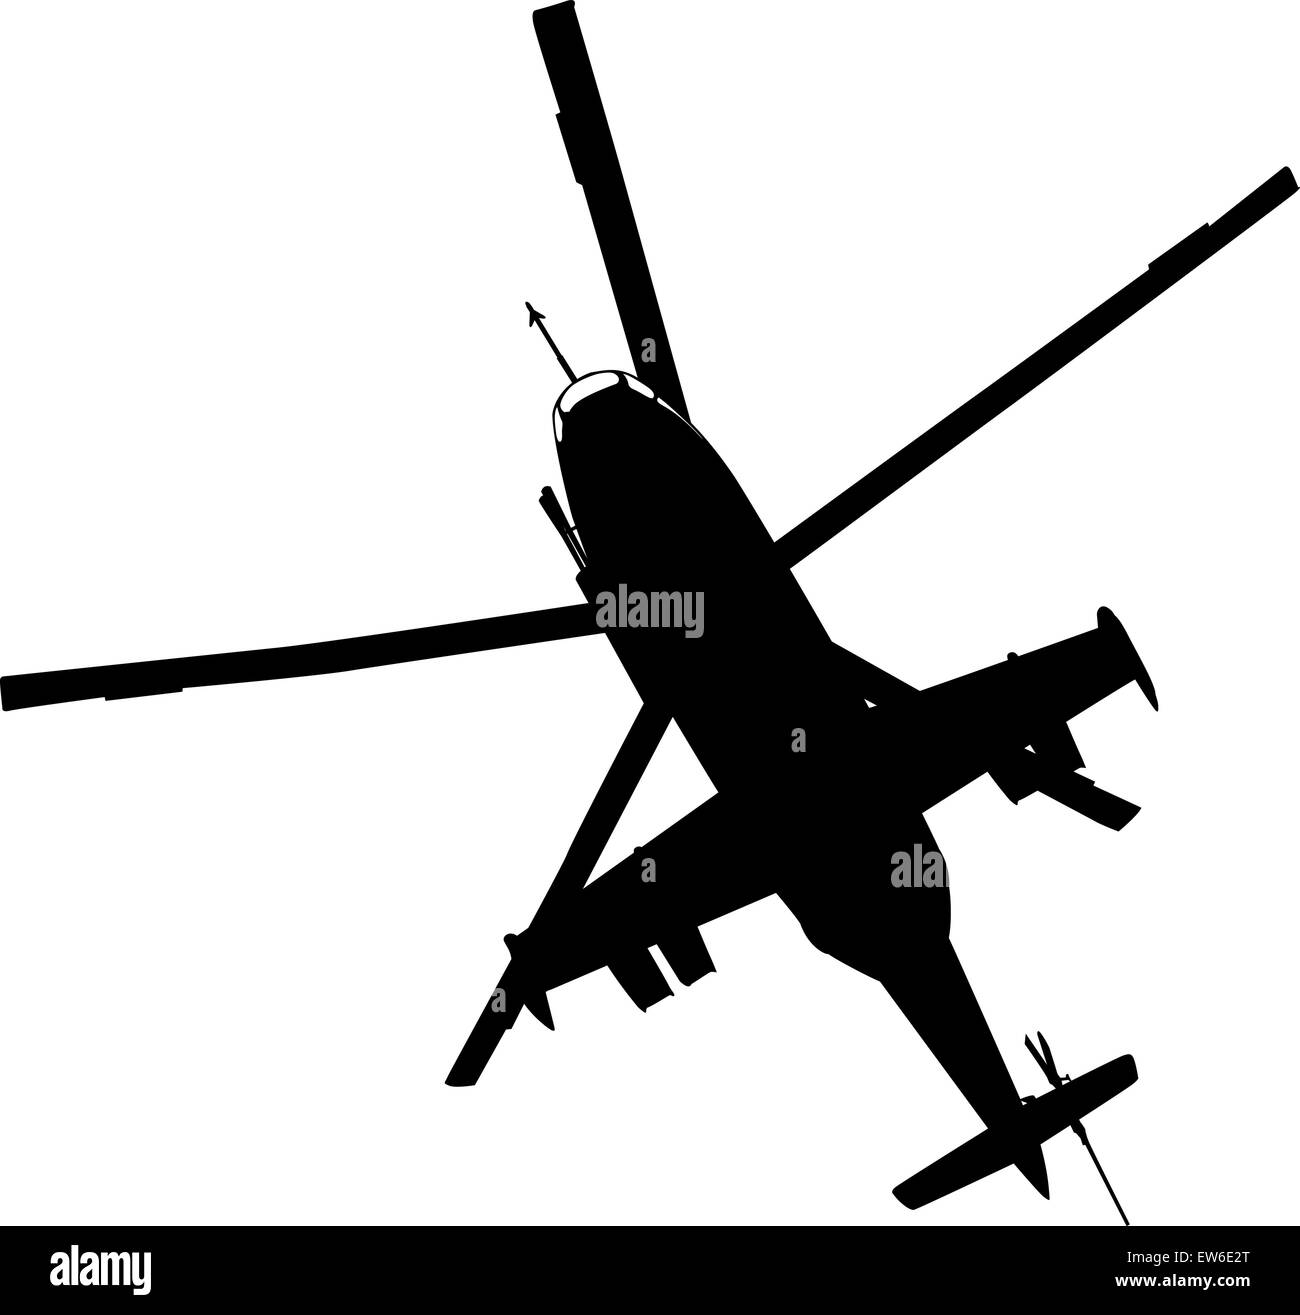 Helicopter silhouette Stock Vector